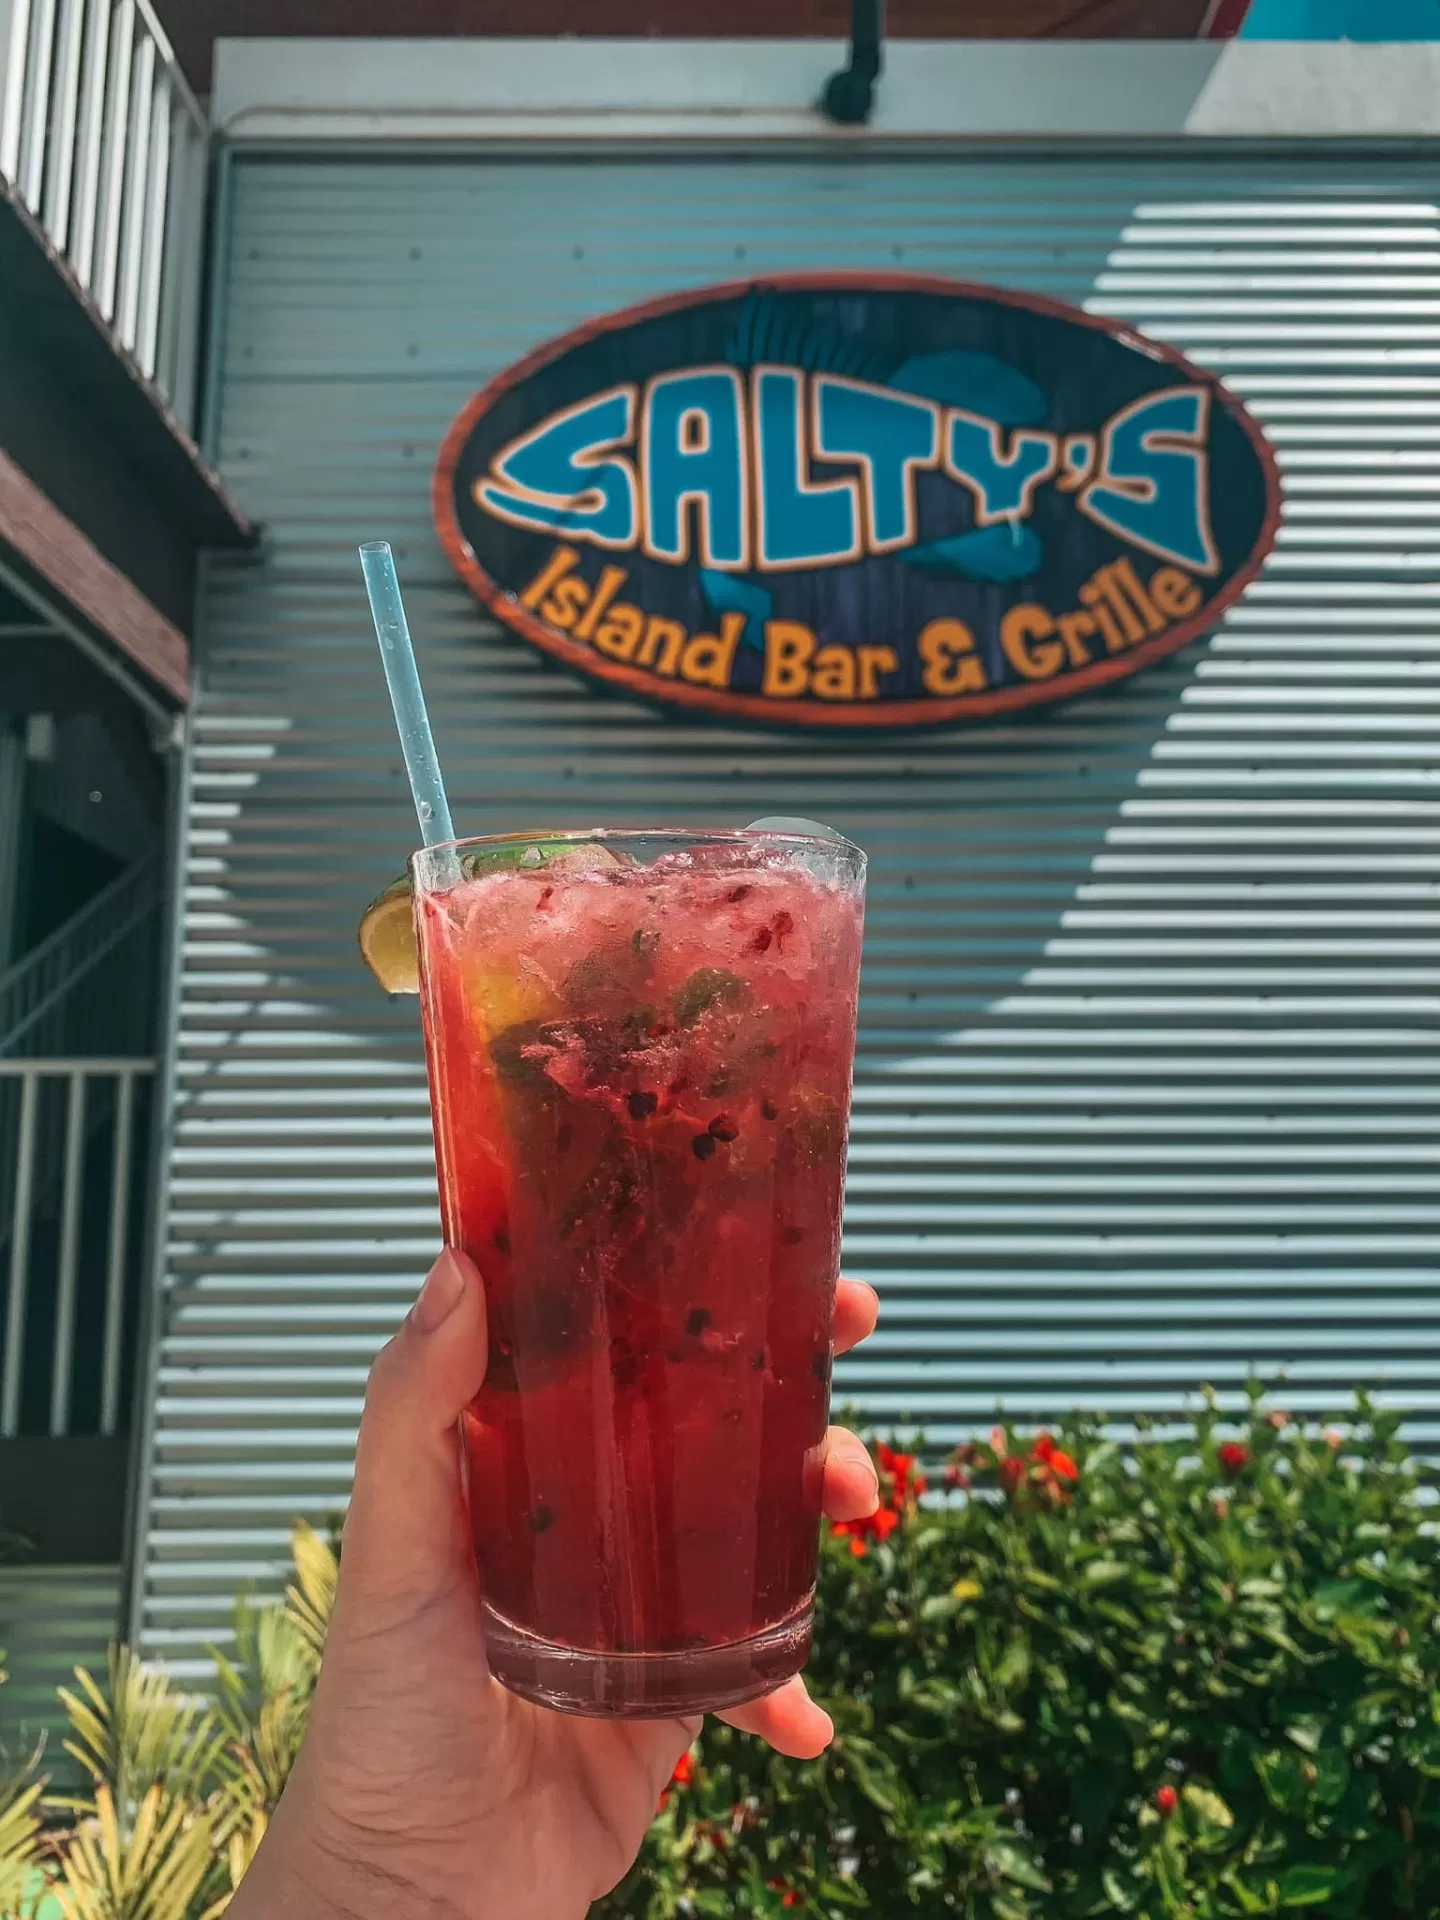 Fruity mojito from Salty's Restaurant Clearwater Beach